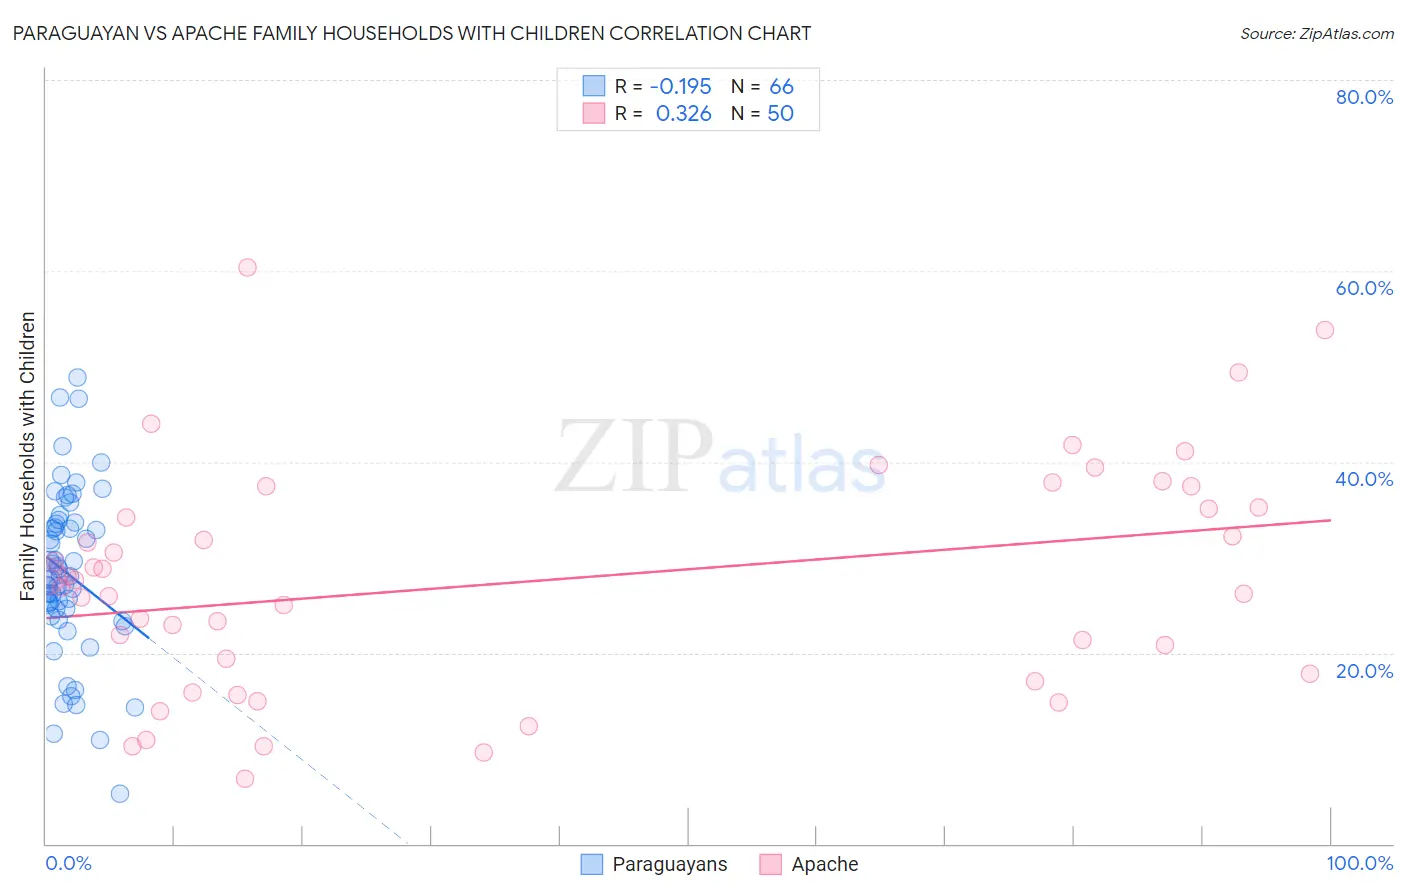 Paraguayan vs Apache Family Households with Children